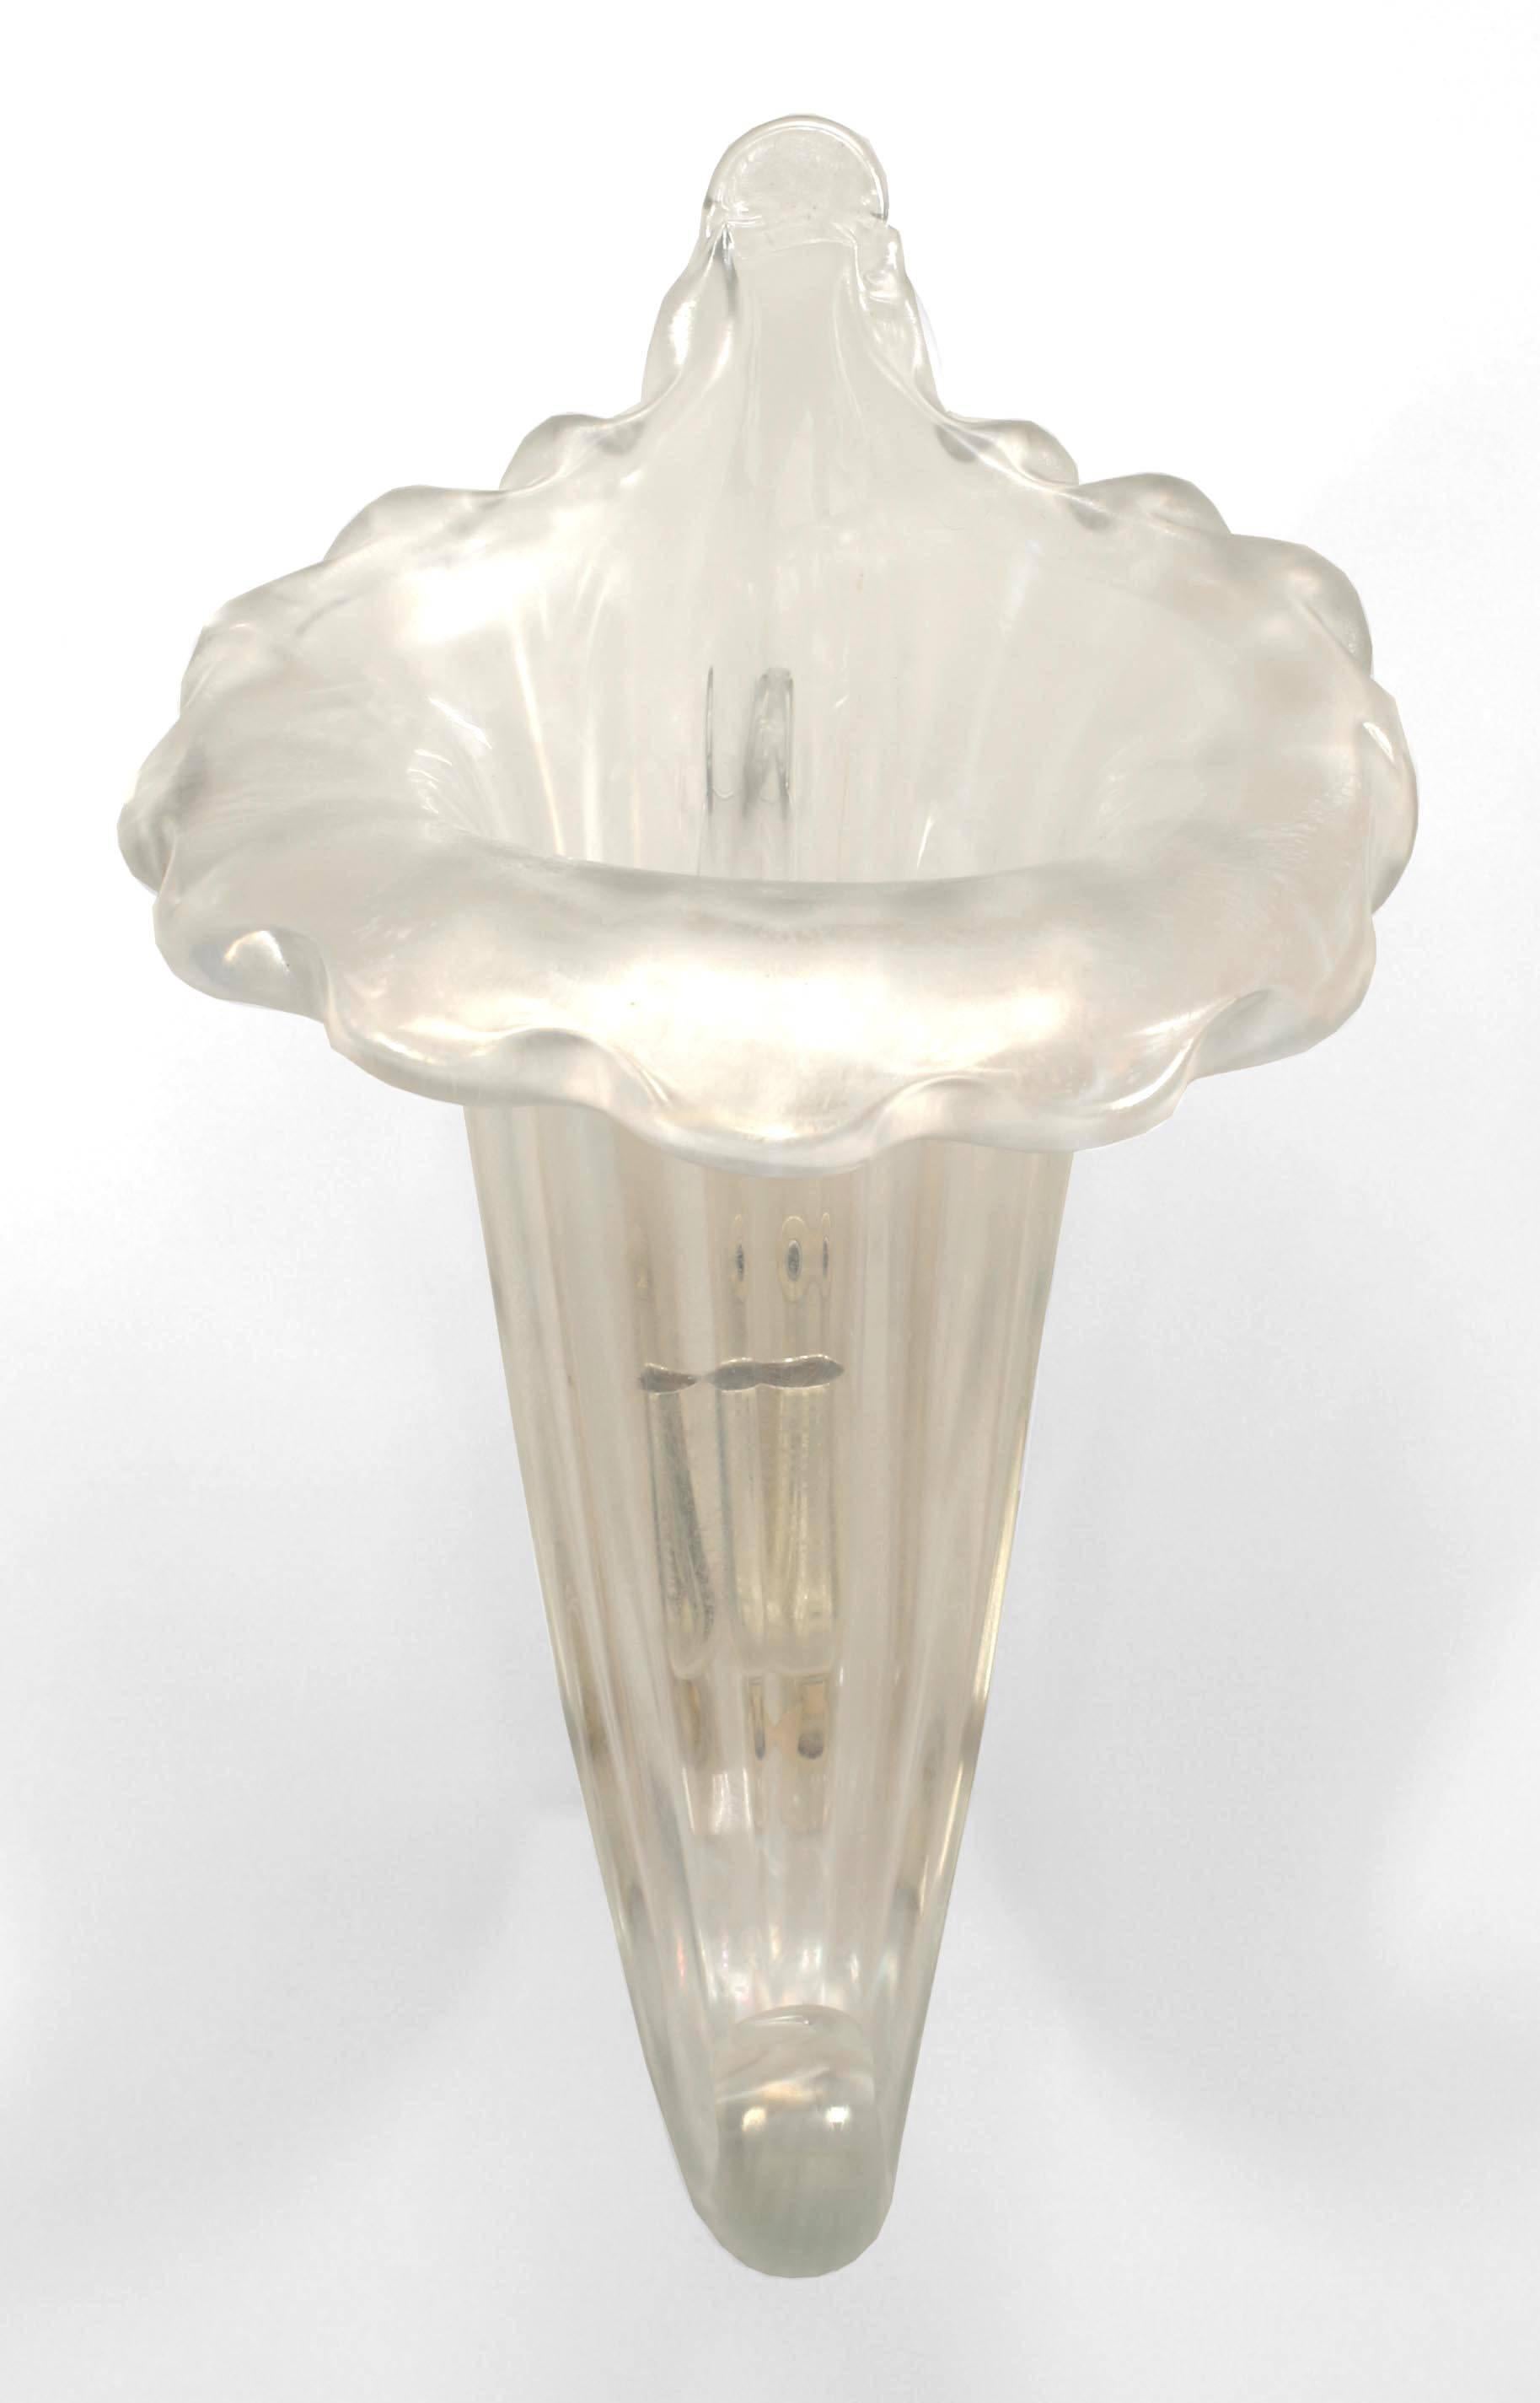 4 Italian Murano iridescent glass wall sconces with a fluted cornucopia form supported by a brass bracket. (PRICED EACH)
